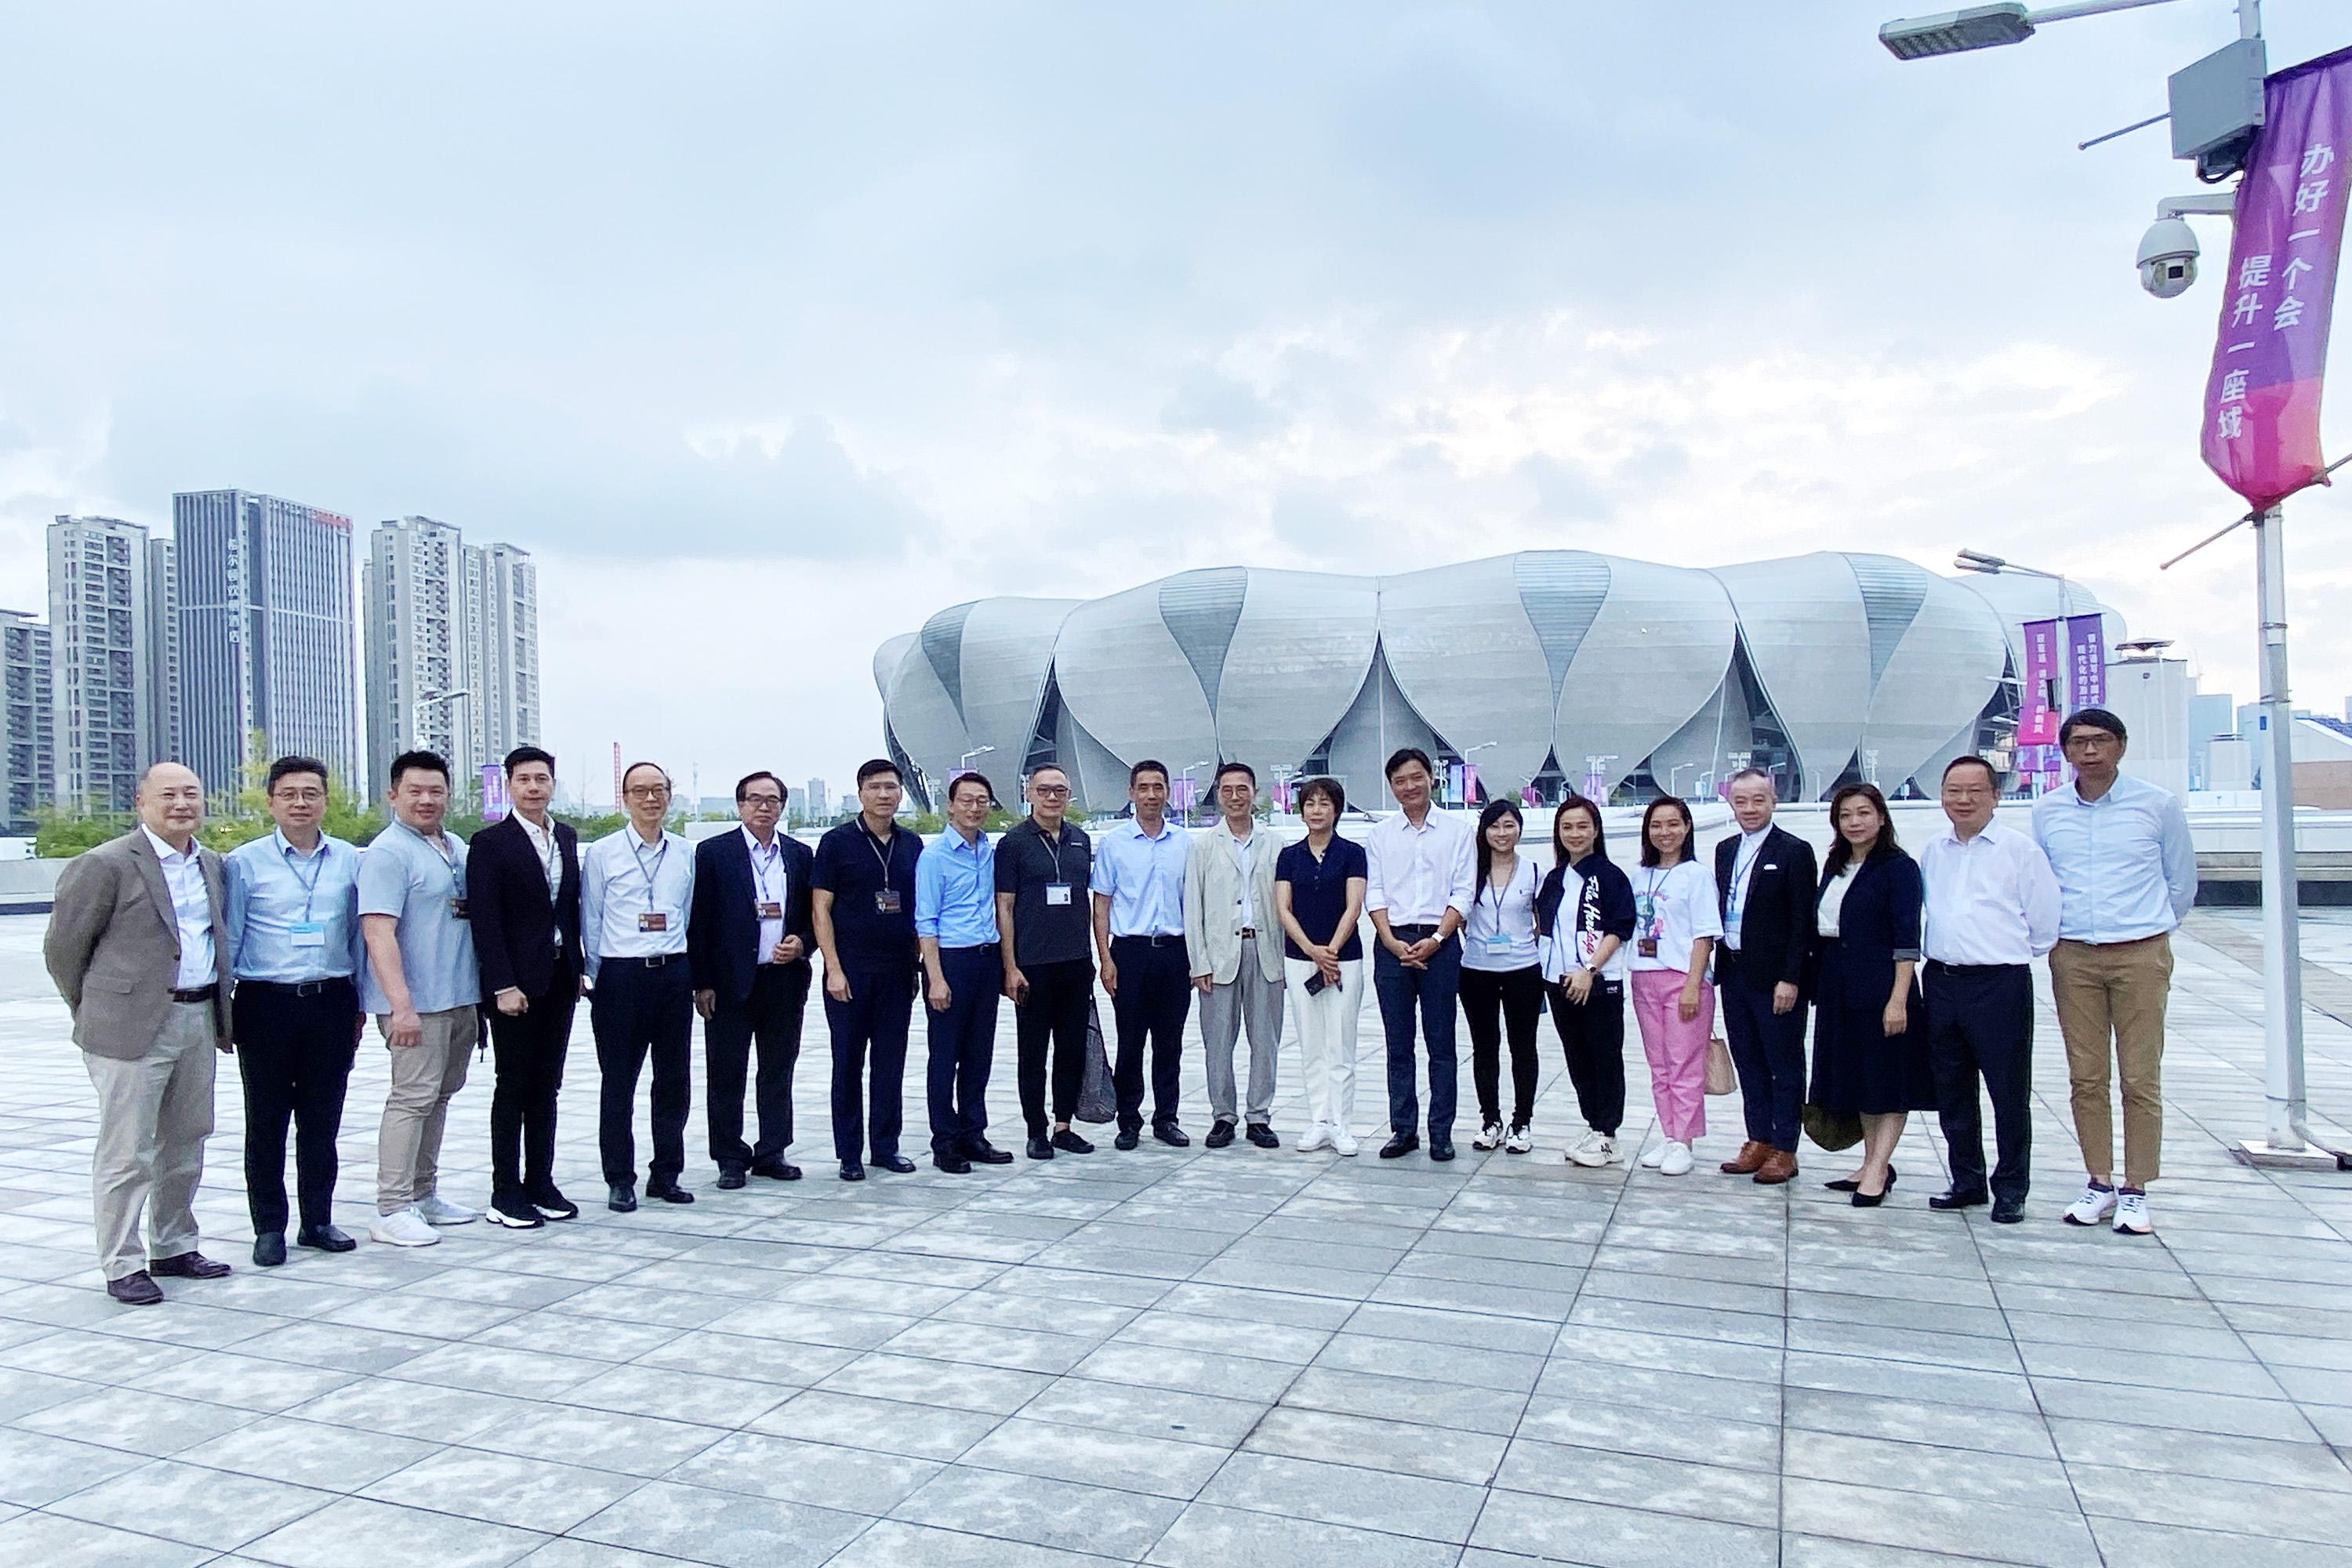 LegCo Panel on Home Affairs, Culture and Sports continues duty visit to Hangzhou today (August 1). The delegation visits the Hangzhou Olympic Sports Centre.